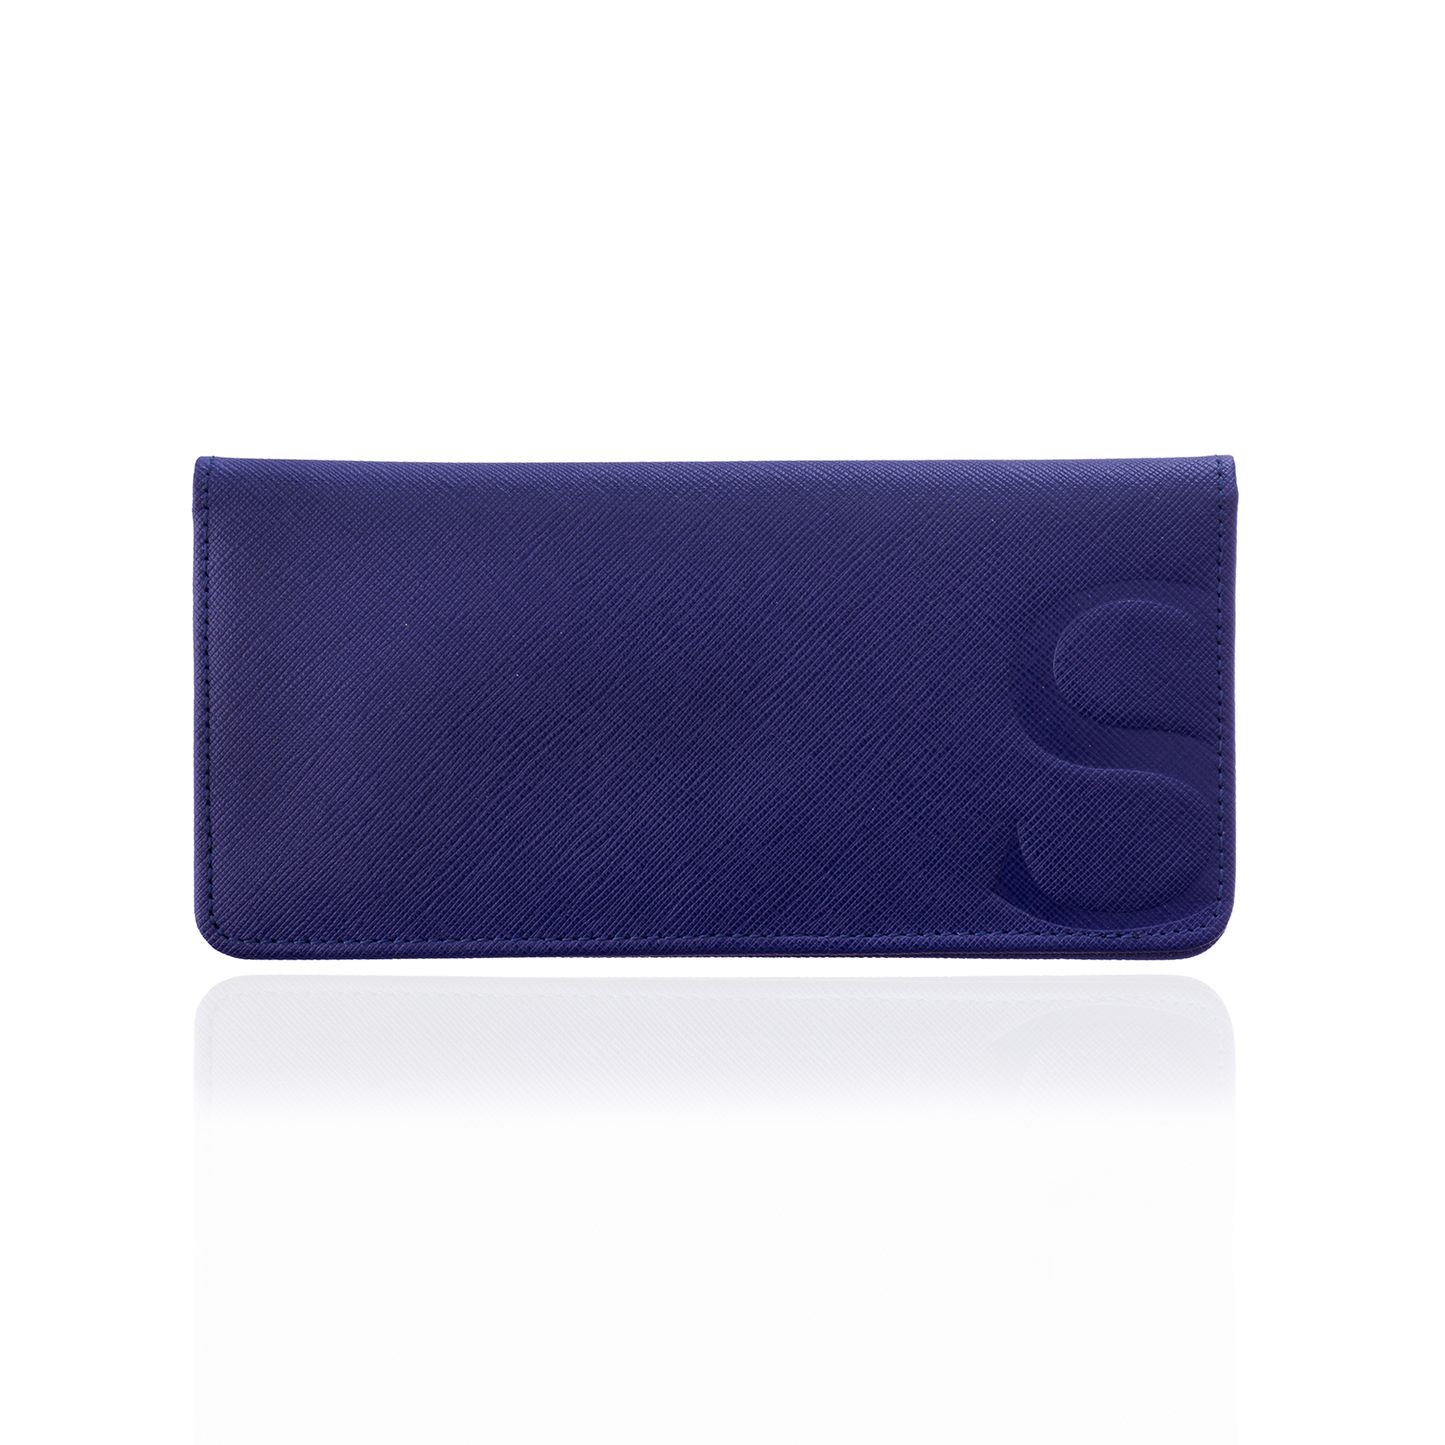 Slim Wallet in Blue Textured Leather